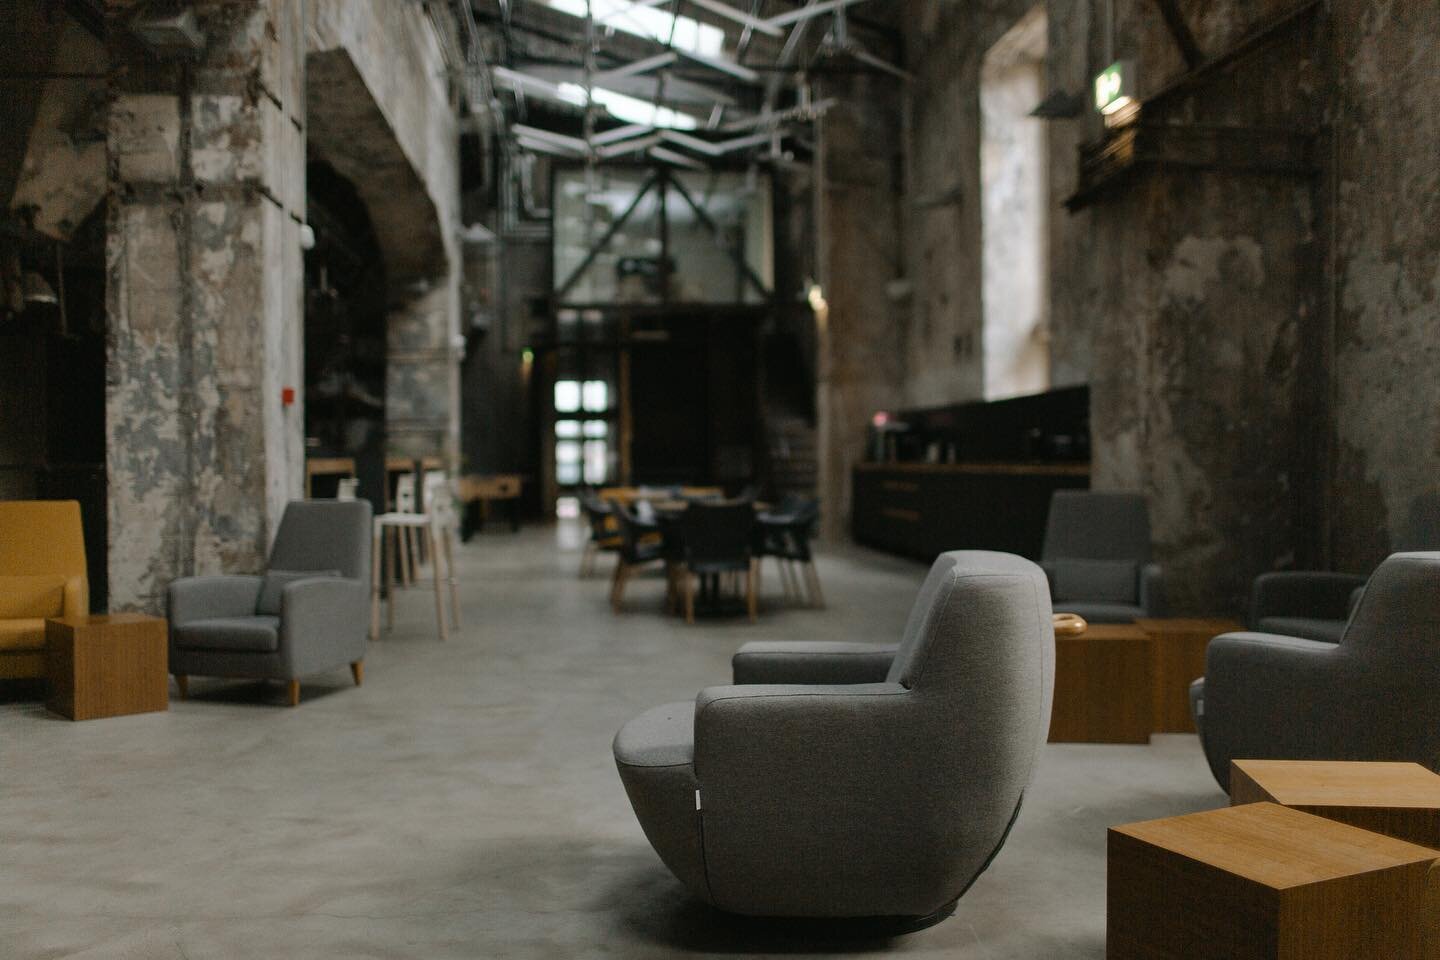 In Tallinn, Estonia this week. Such inspiring interiors at this office space! We love seeing what others are doing in the co-working world.